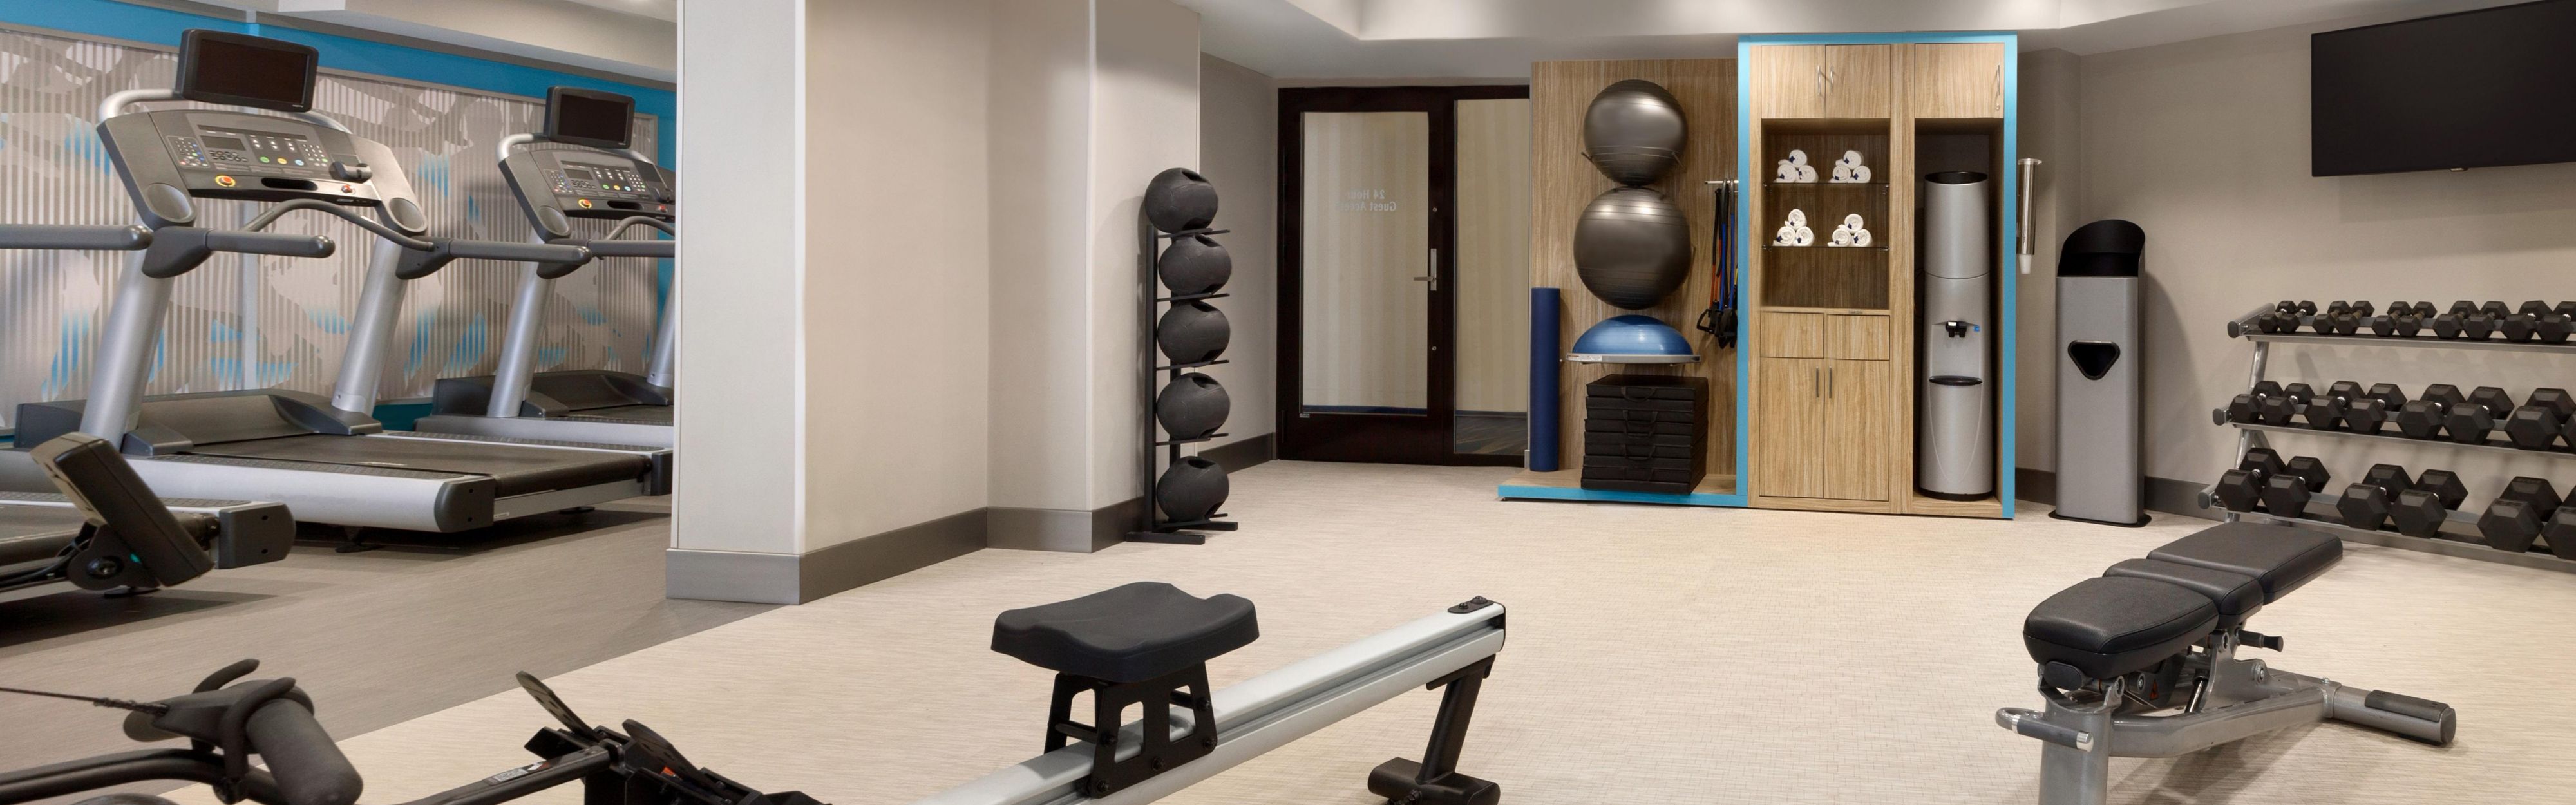 From free weights to treadmills, our fitness center has it all.